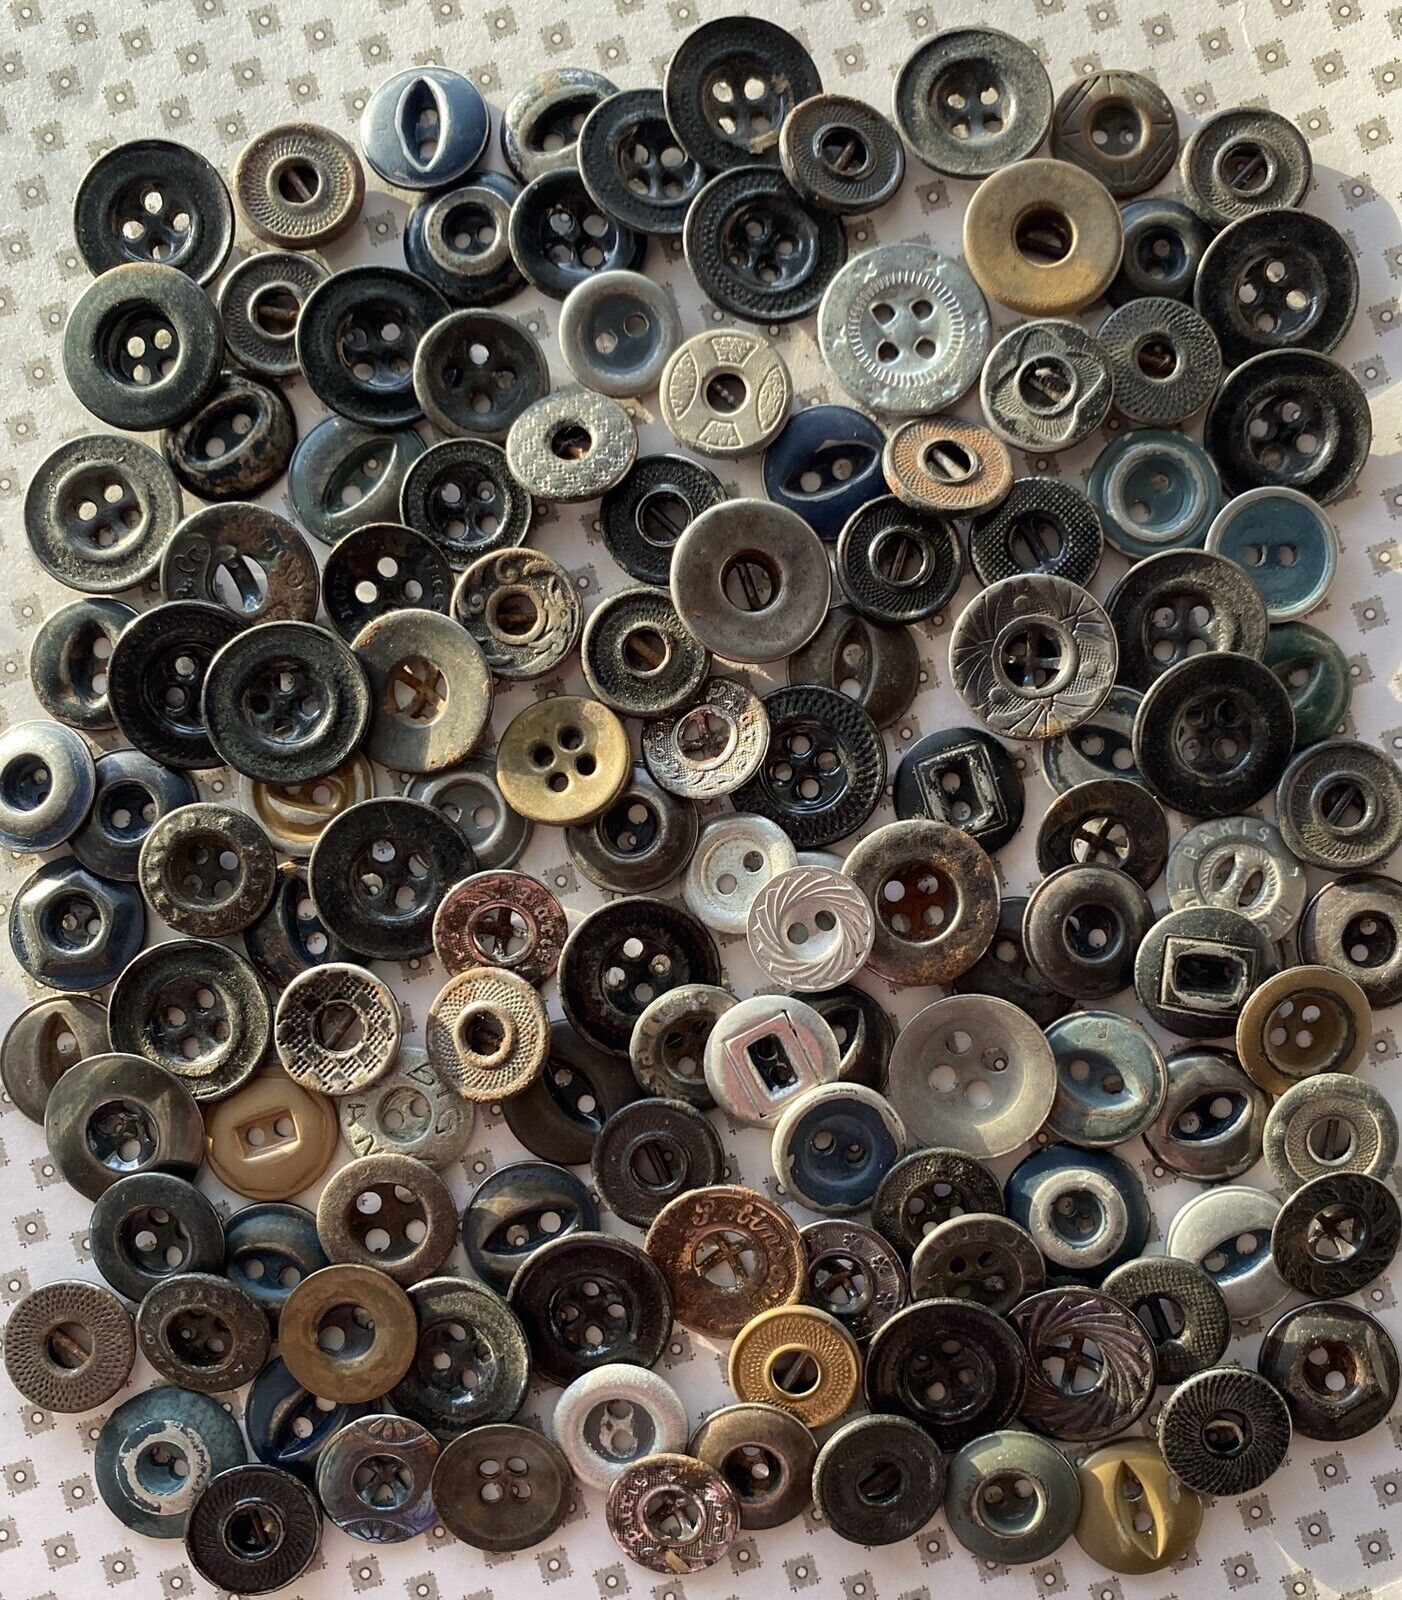 Vintage Metal Work Buttons Lot of 130